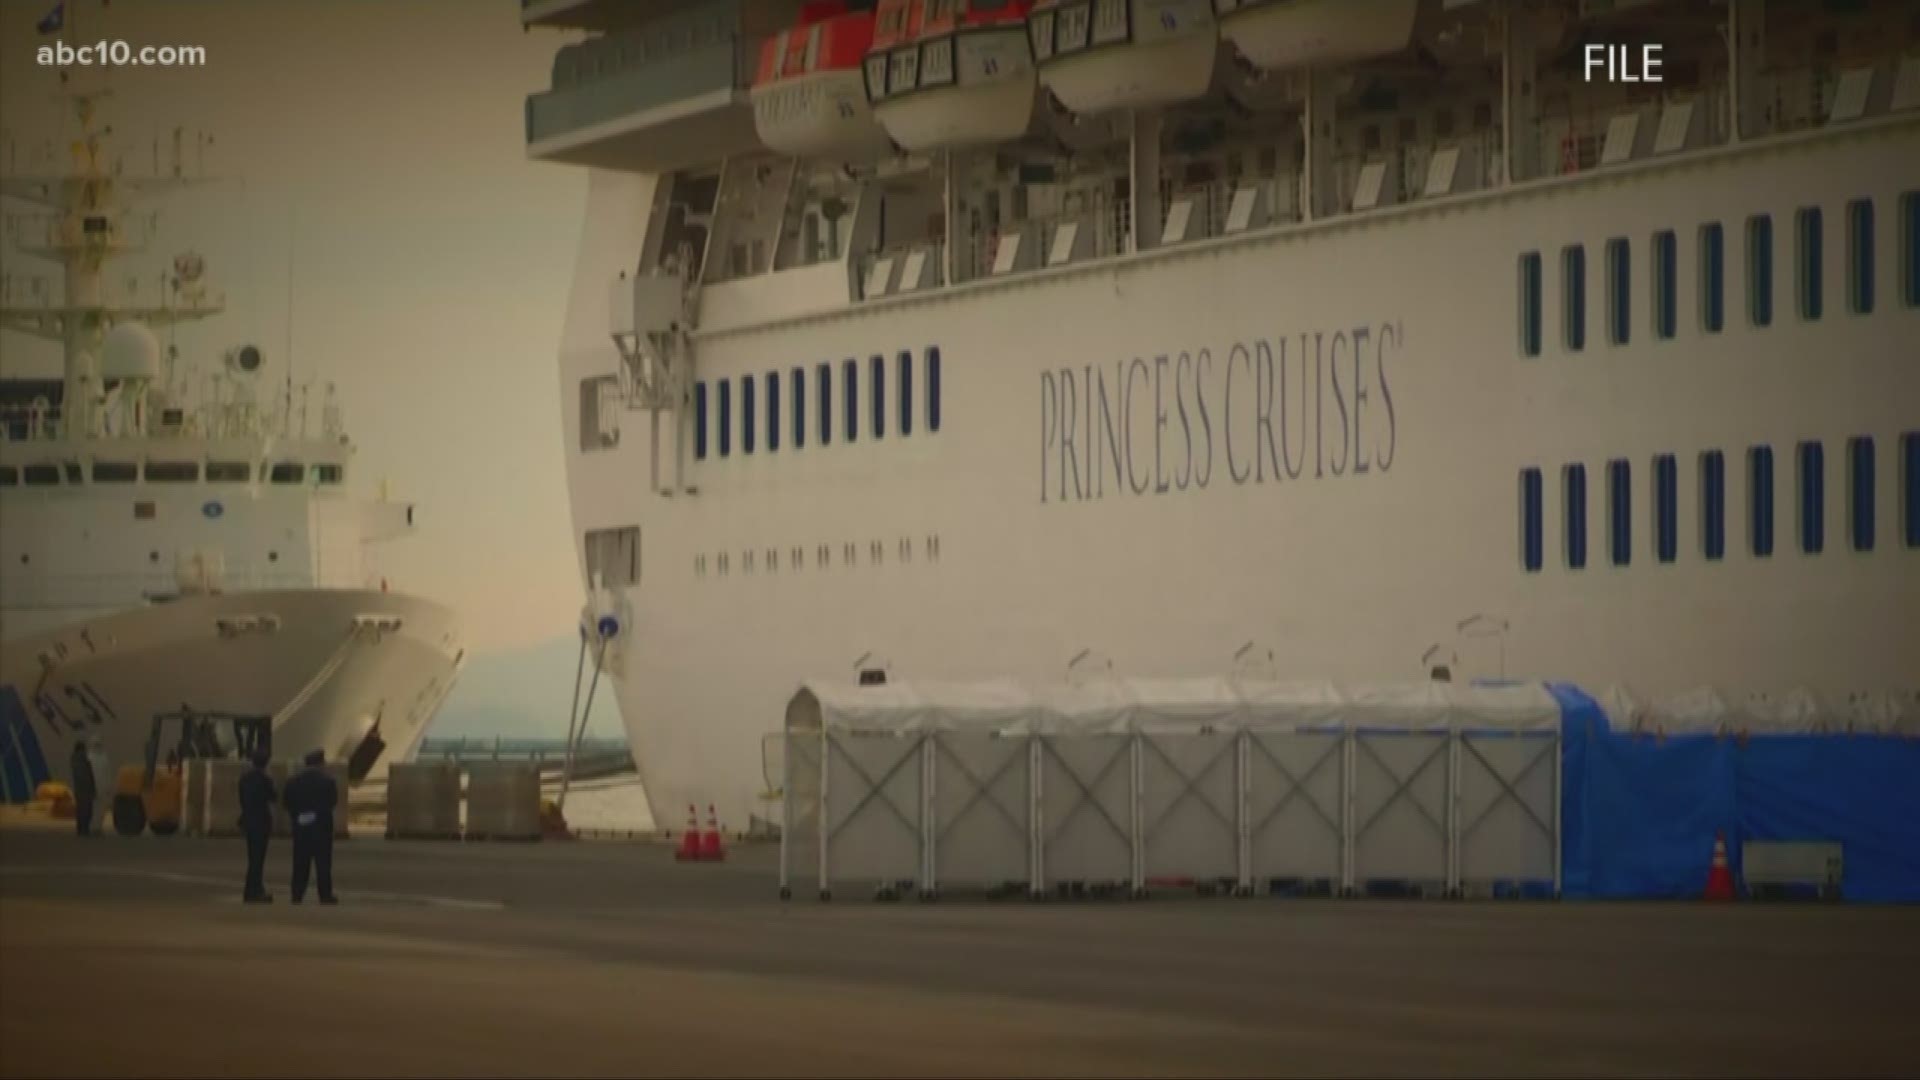 The highest concentration outside of china is on a cruise ship in Japan. A Granite Bay couple spoke to ABC10 about what life is like under quarantine.